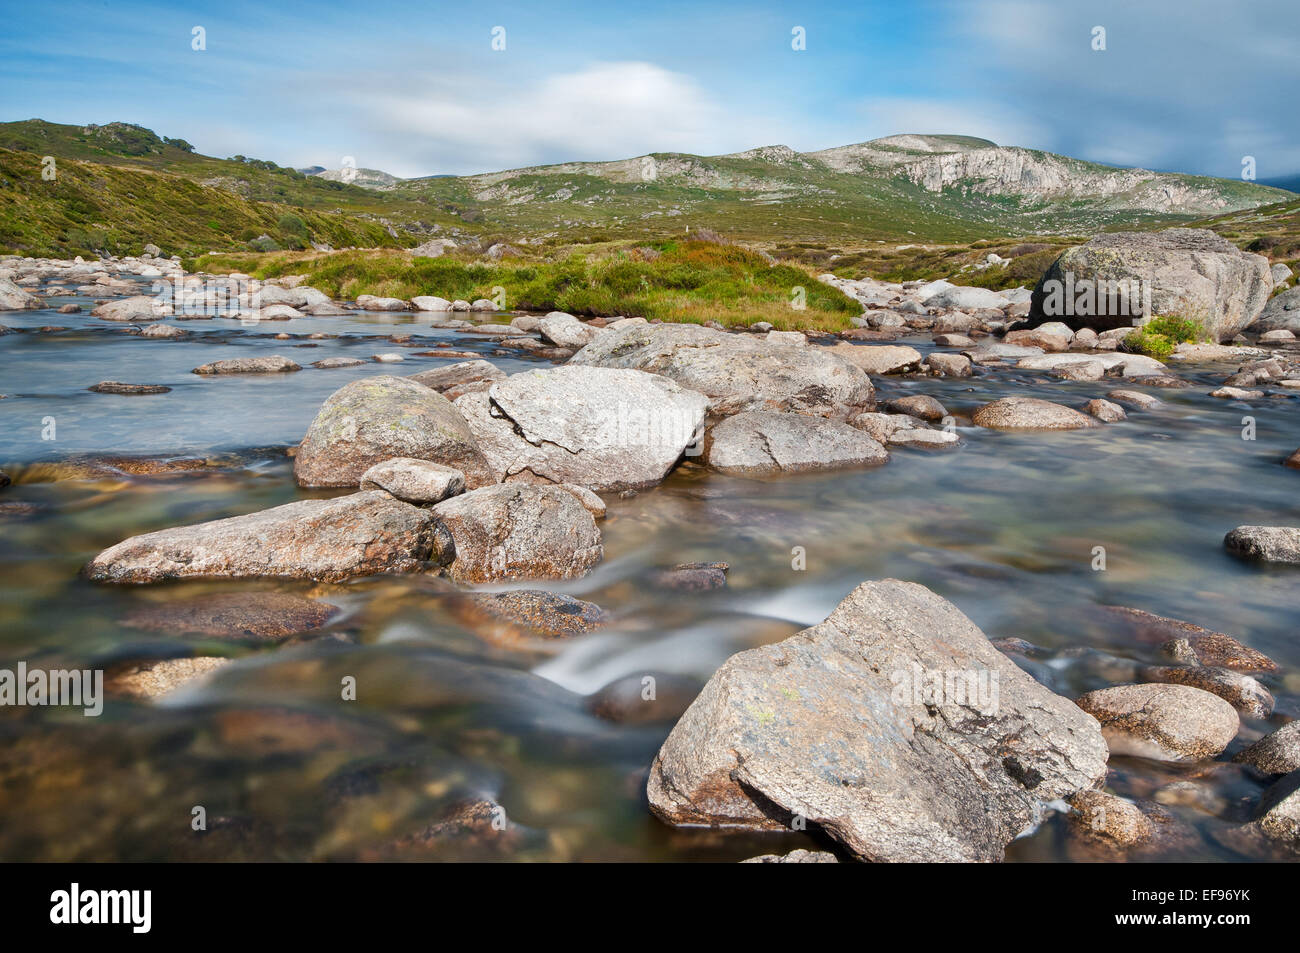 Snowy River close to its spring in Kosciuszko National Park. Stock Photo